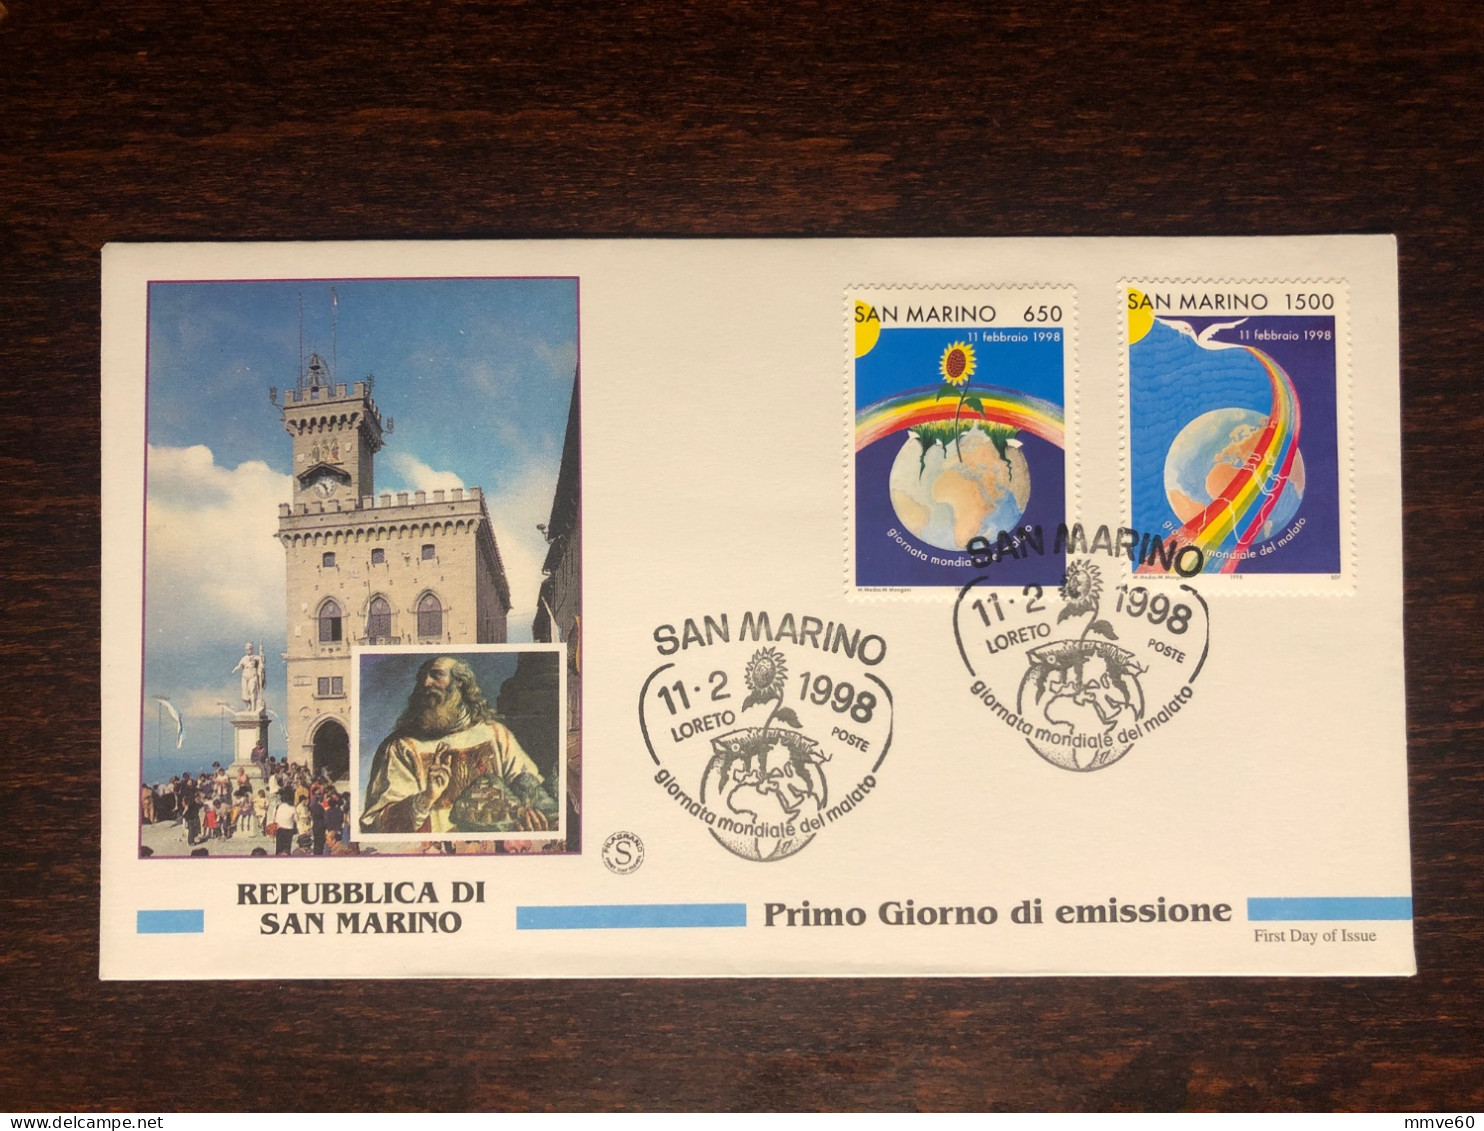 SAN MARINO FDC COVER 1998 YEAR DAY OF SICK HEALTH MEDICINE STAMPS - FDC